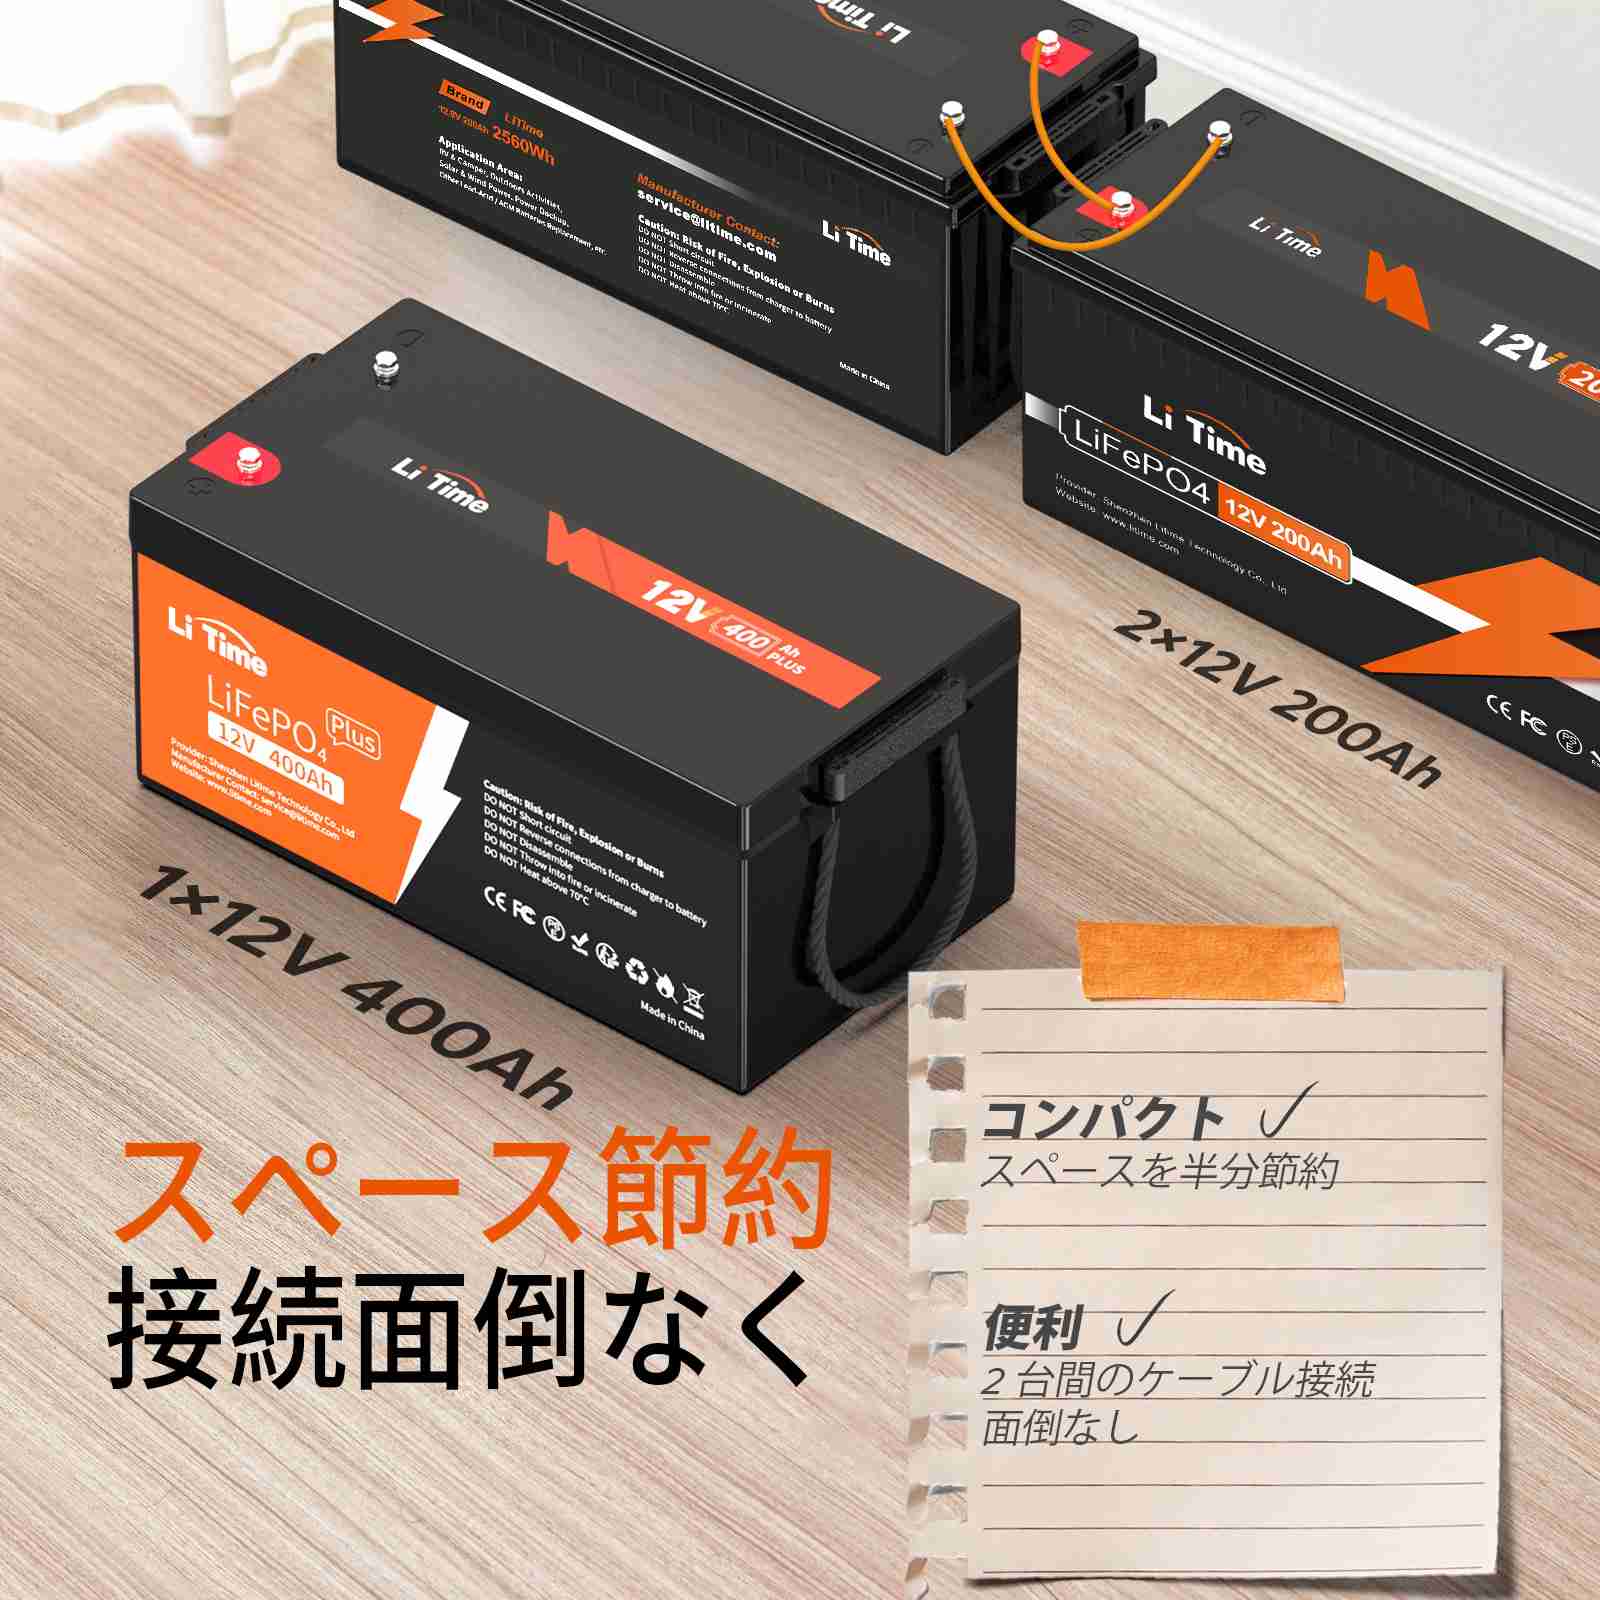 LiTime「Ampere Time 」12V 400Ah LiFePO4 リン酸鉄リチウムイオンバッテリー 内蔵250A BMS ampere time